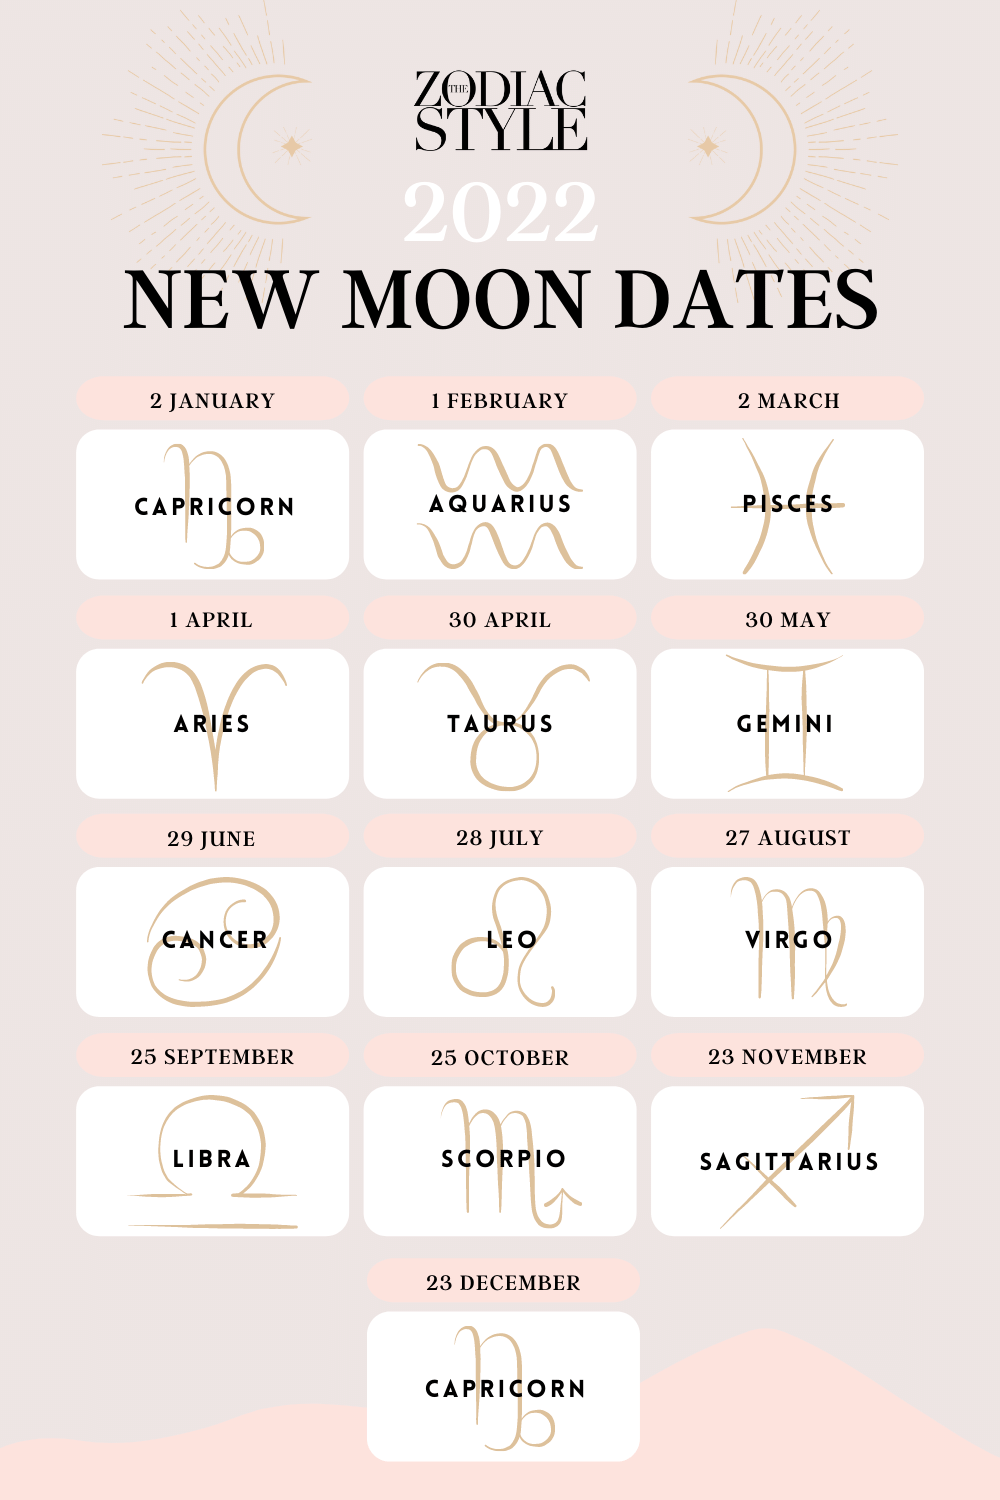 New Moon Calendar 2022 Manifest Magic With All The New Moon Dates In 2022 - The Zodiac Style